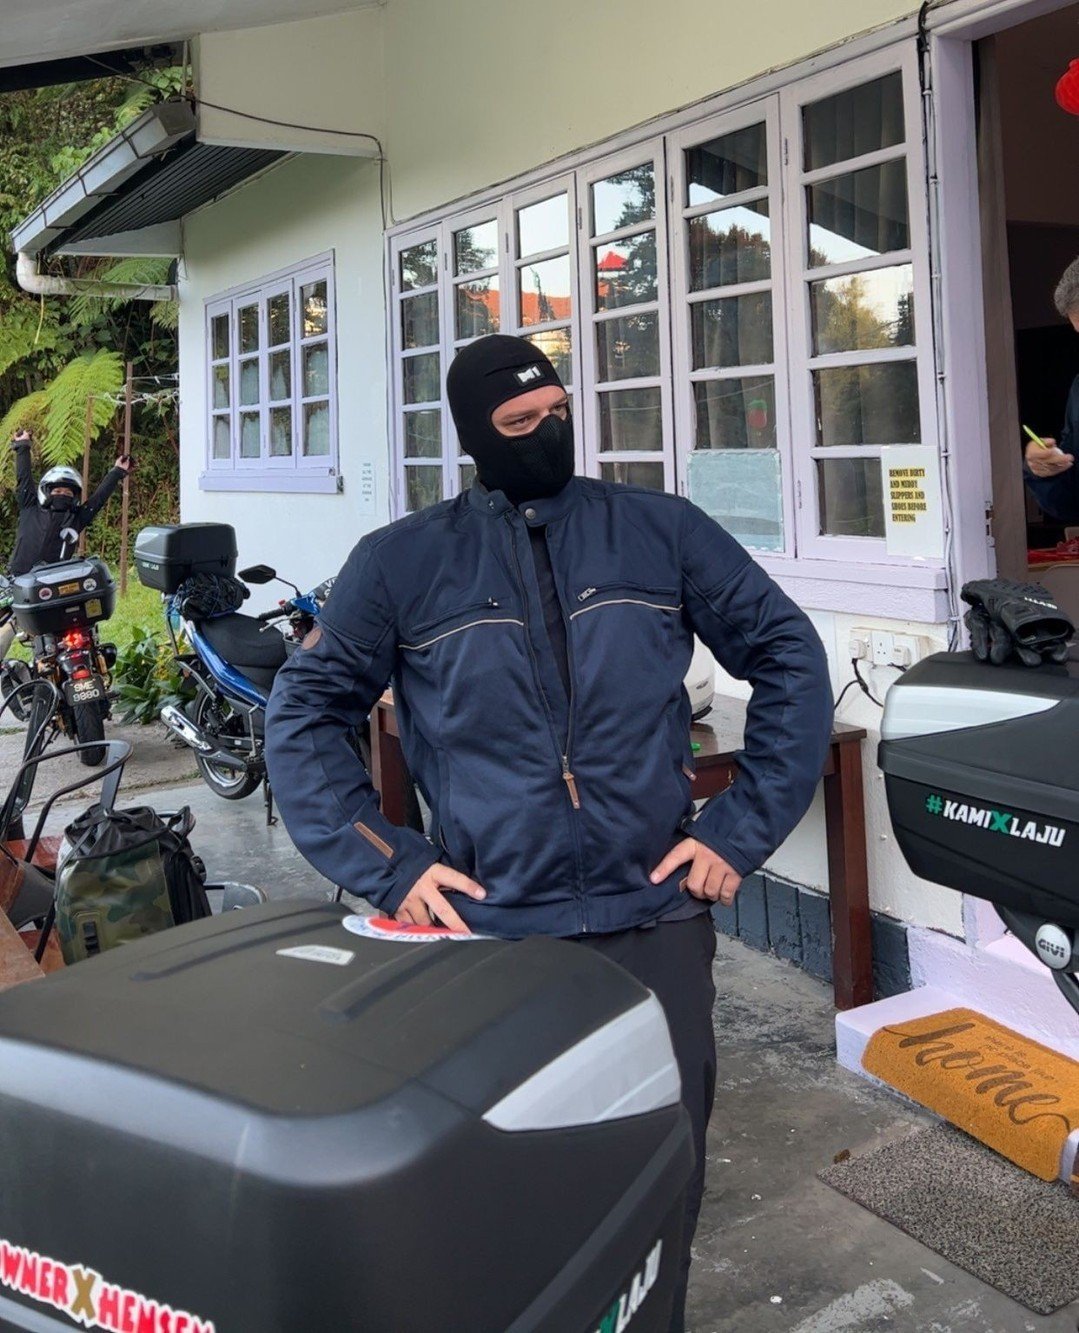 In the Cameron Highlands, about to hit the road! Temperature up here was much easier to handle than the low lying areas.⁠
⁠
- Small Bike Stuff